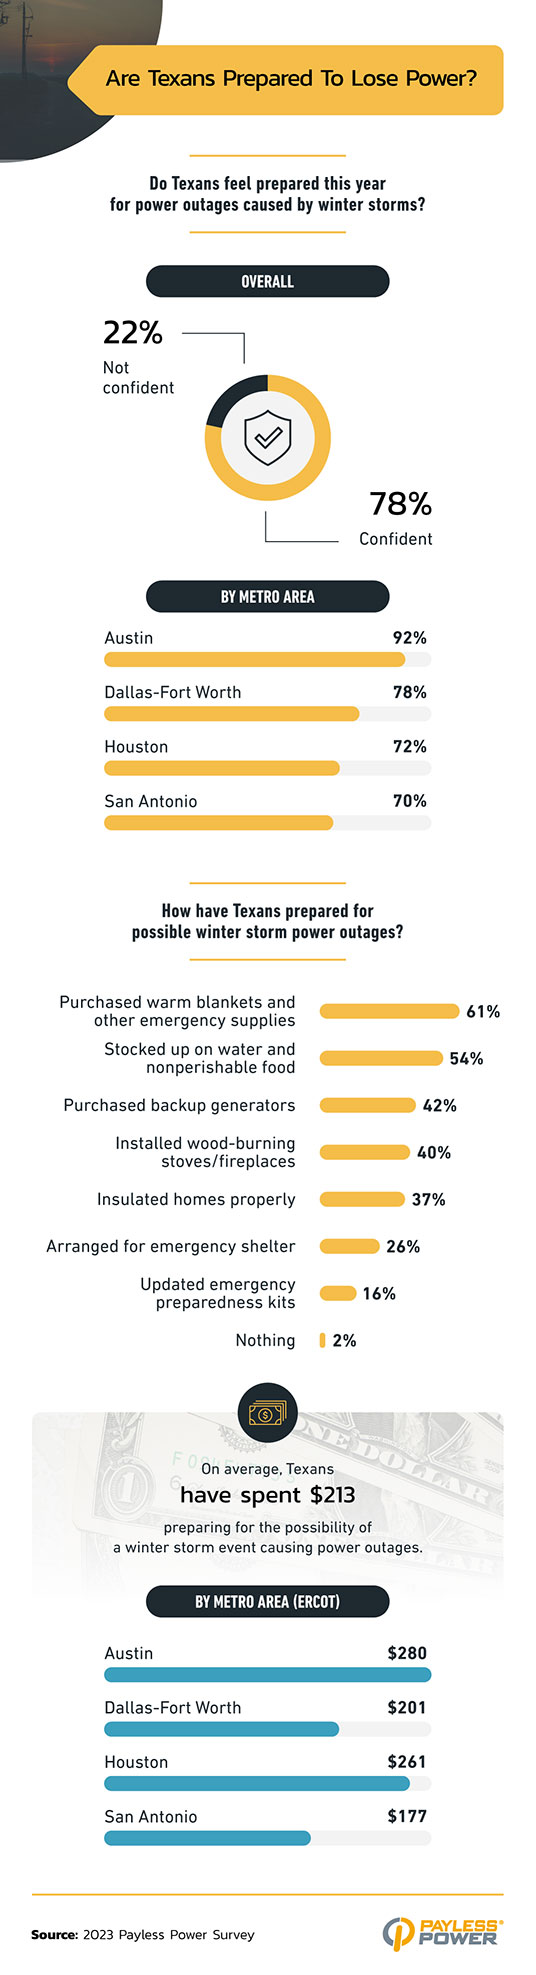 Infographic that explores Texans feelings of preparedness regarding potential power outages this year.